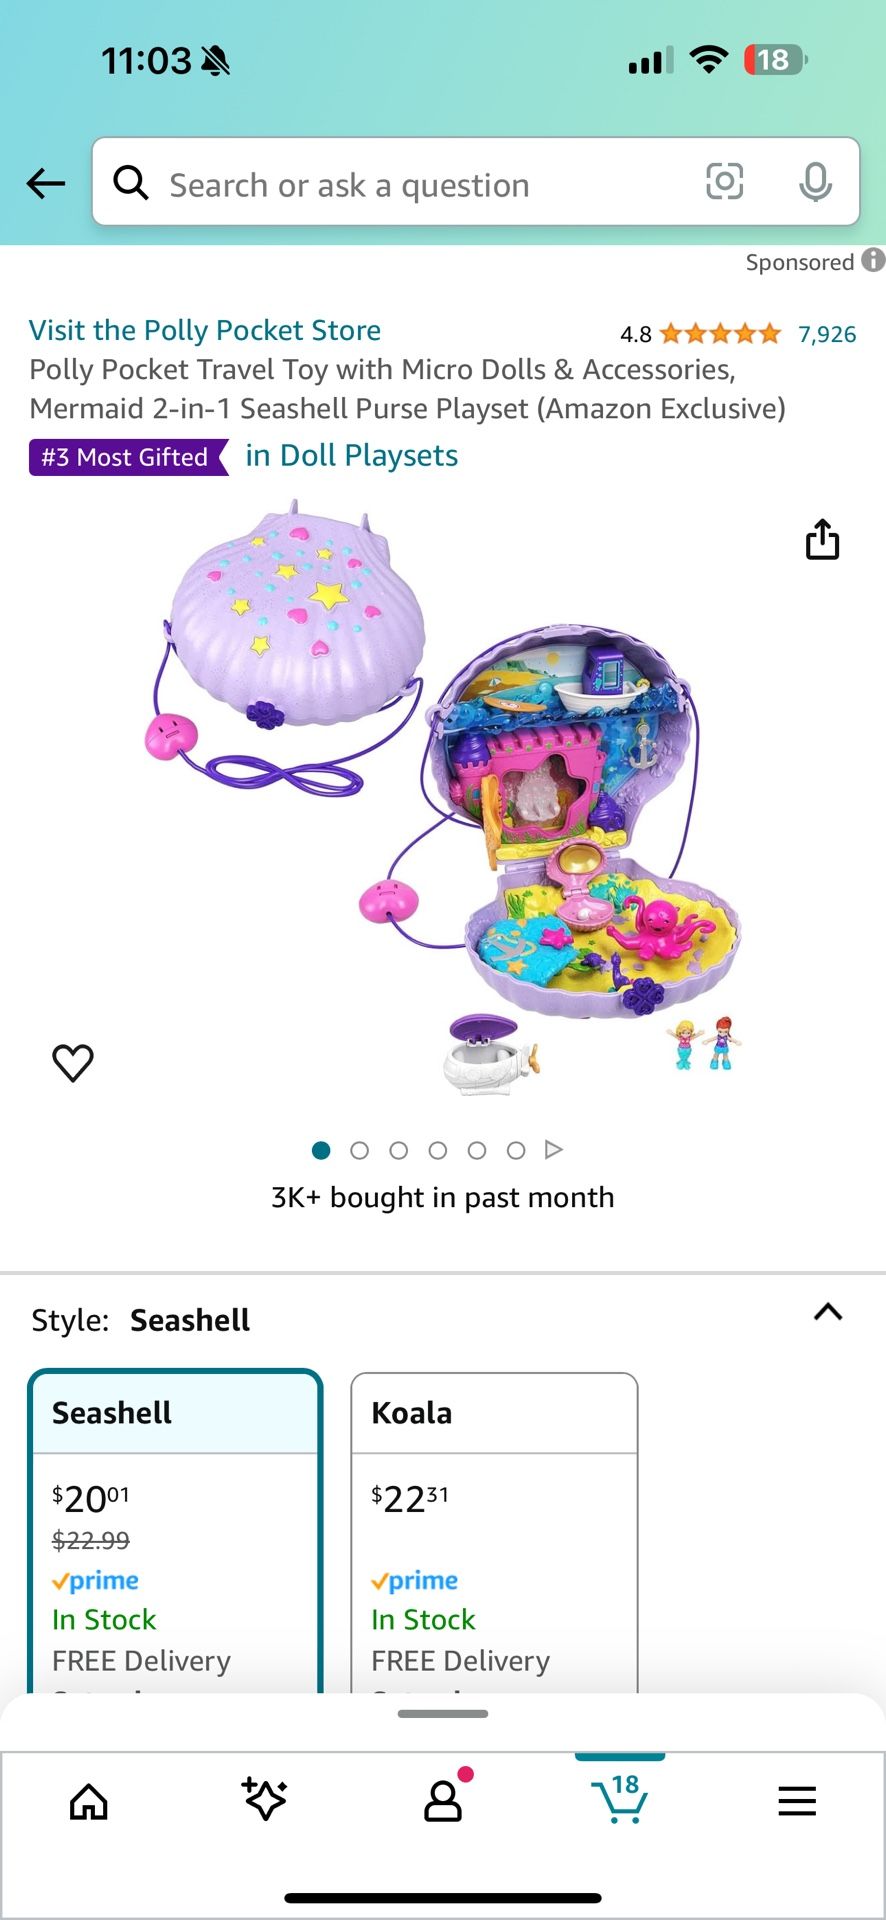 Polly Pocket Travel Toy with Micro Dolls & Accessories, Mermaid 2-in-1 Seashell Purse Playset (Amazon Exclusive)